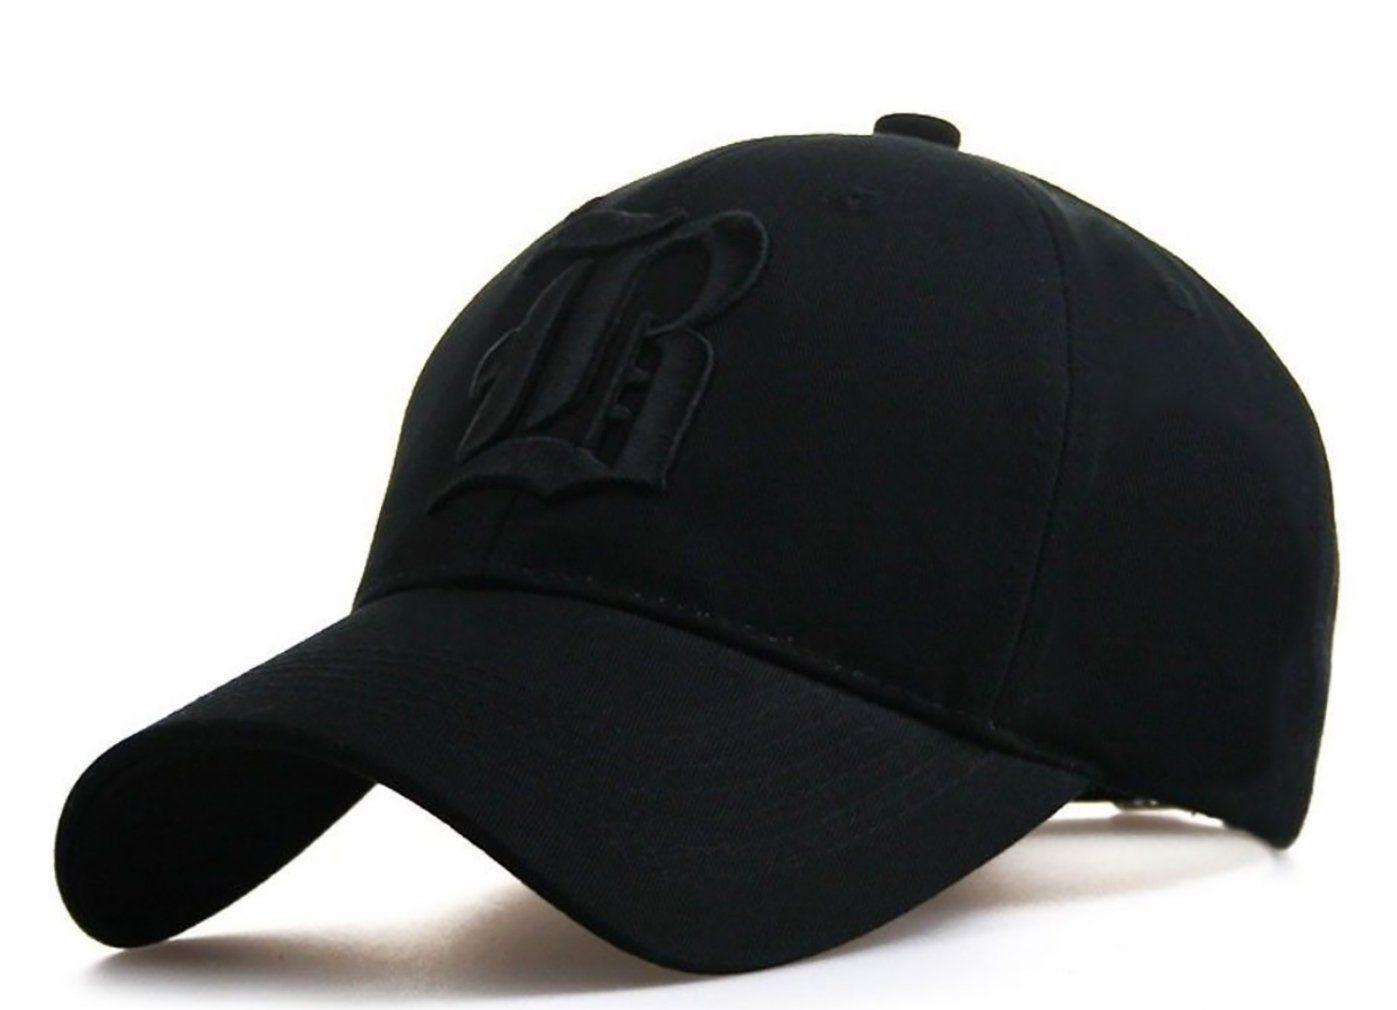 Back to Back Letter B Logo - Officially Casual Baseball Gothic B Letter Cap Caps Snap Back Hat